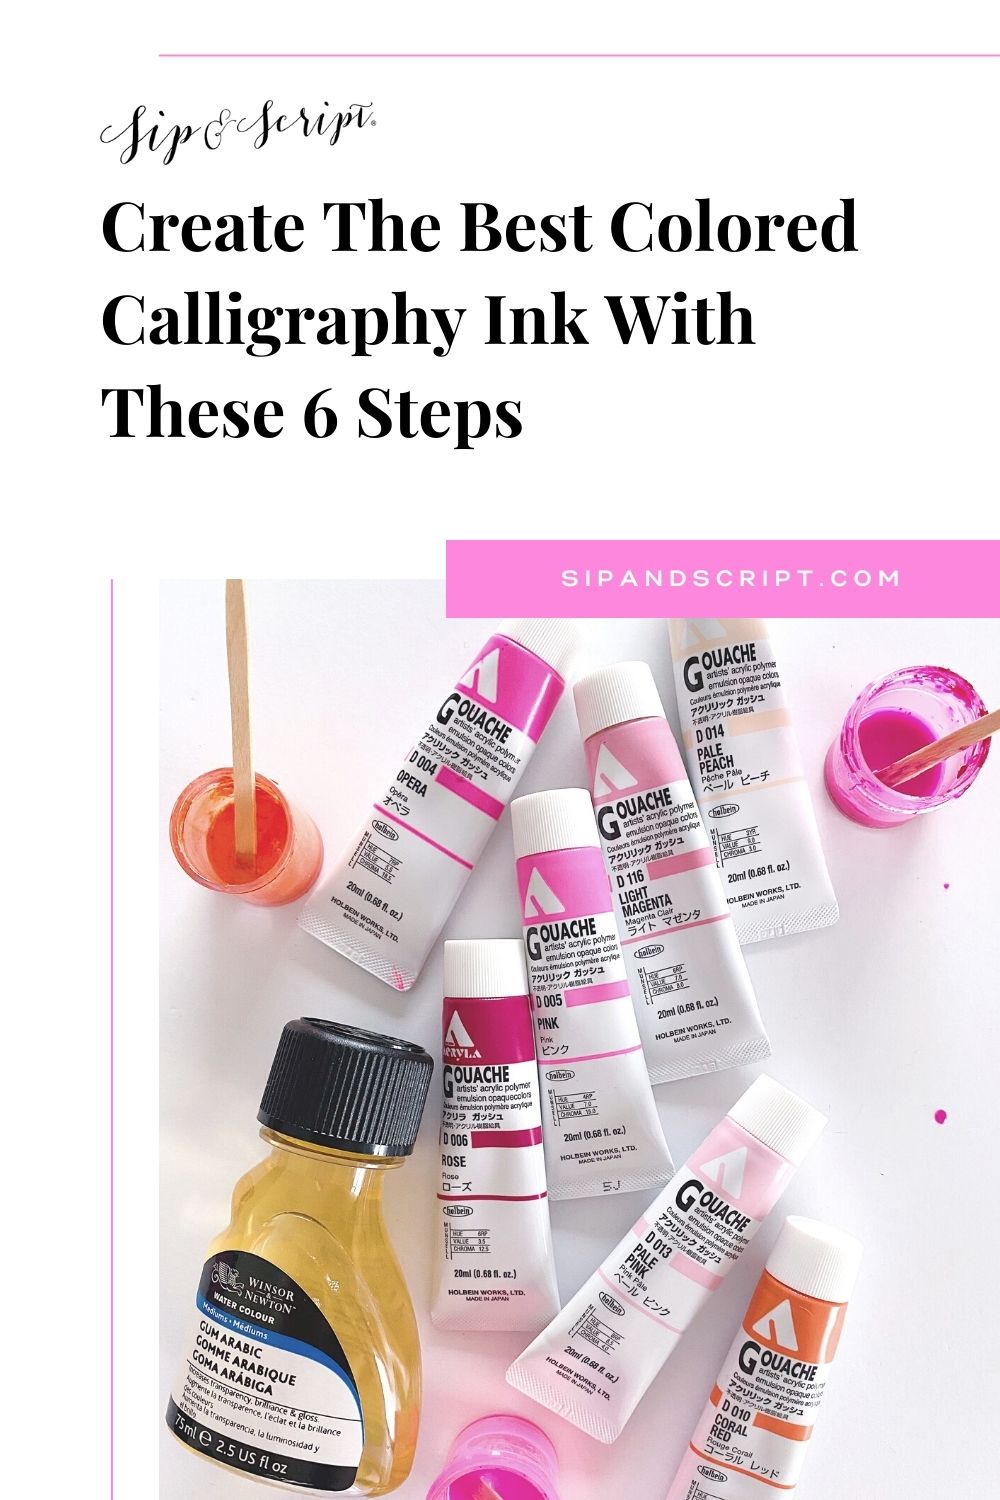 Create The Best Colored Calligraphy Ink With These 6 Steps - Sip